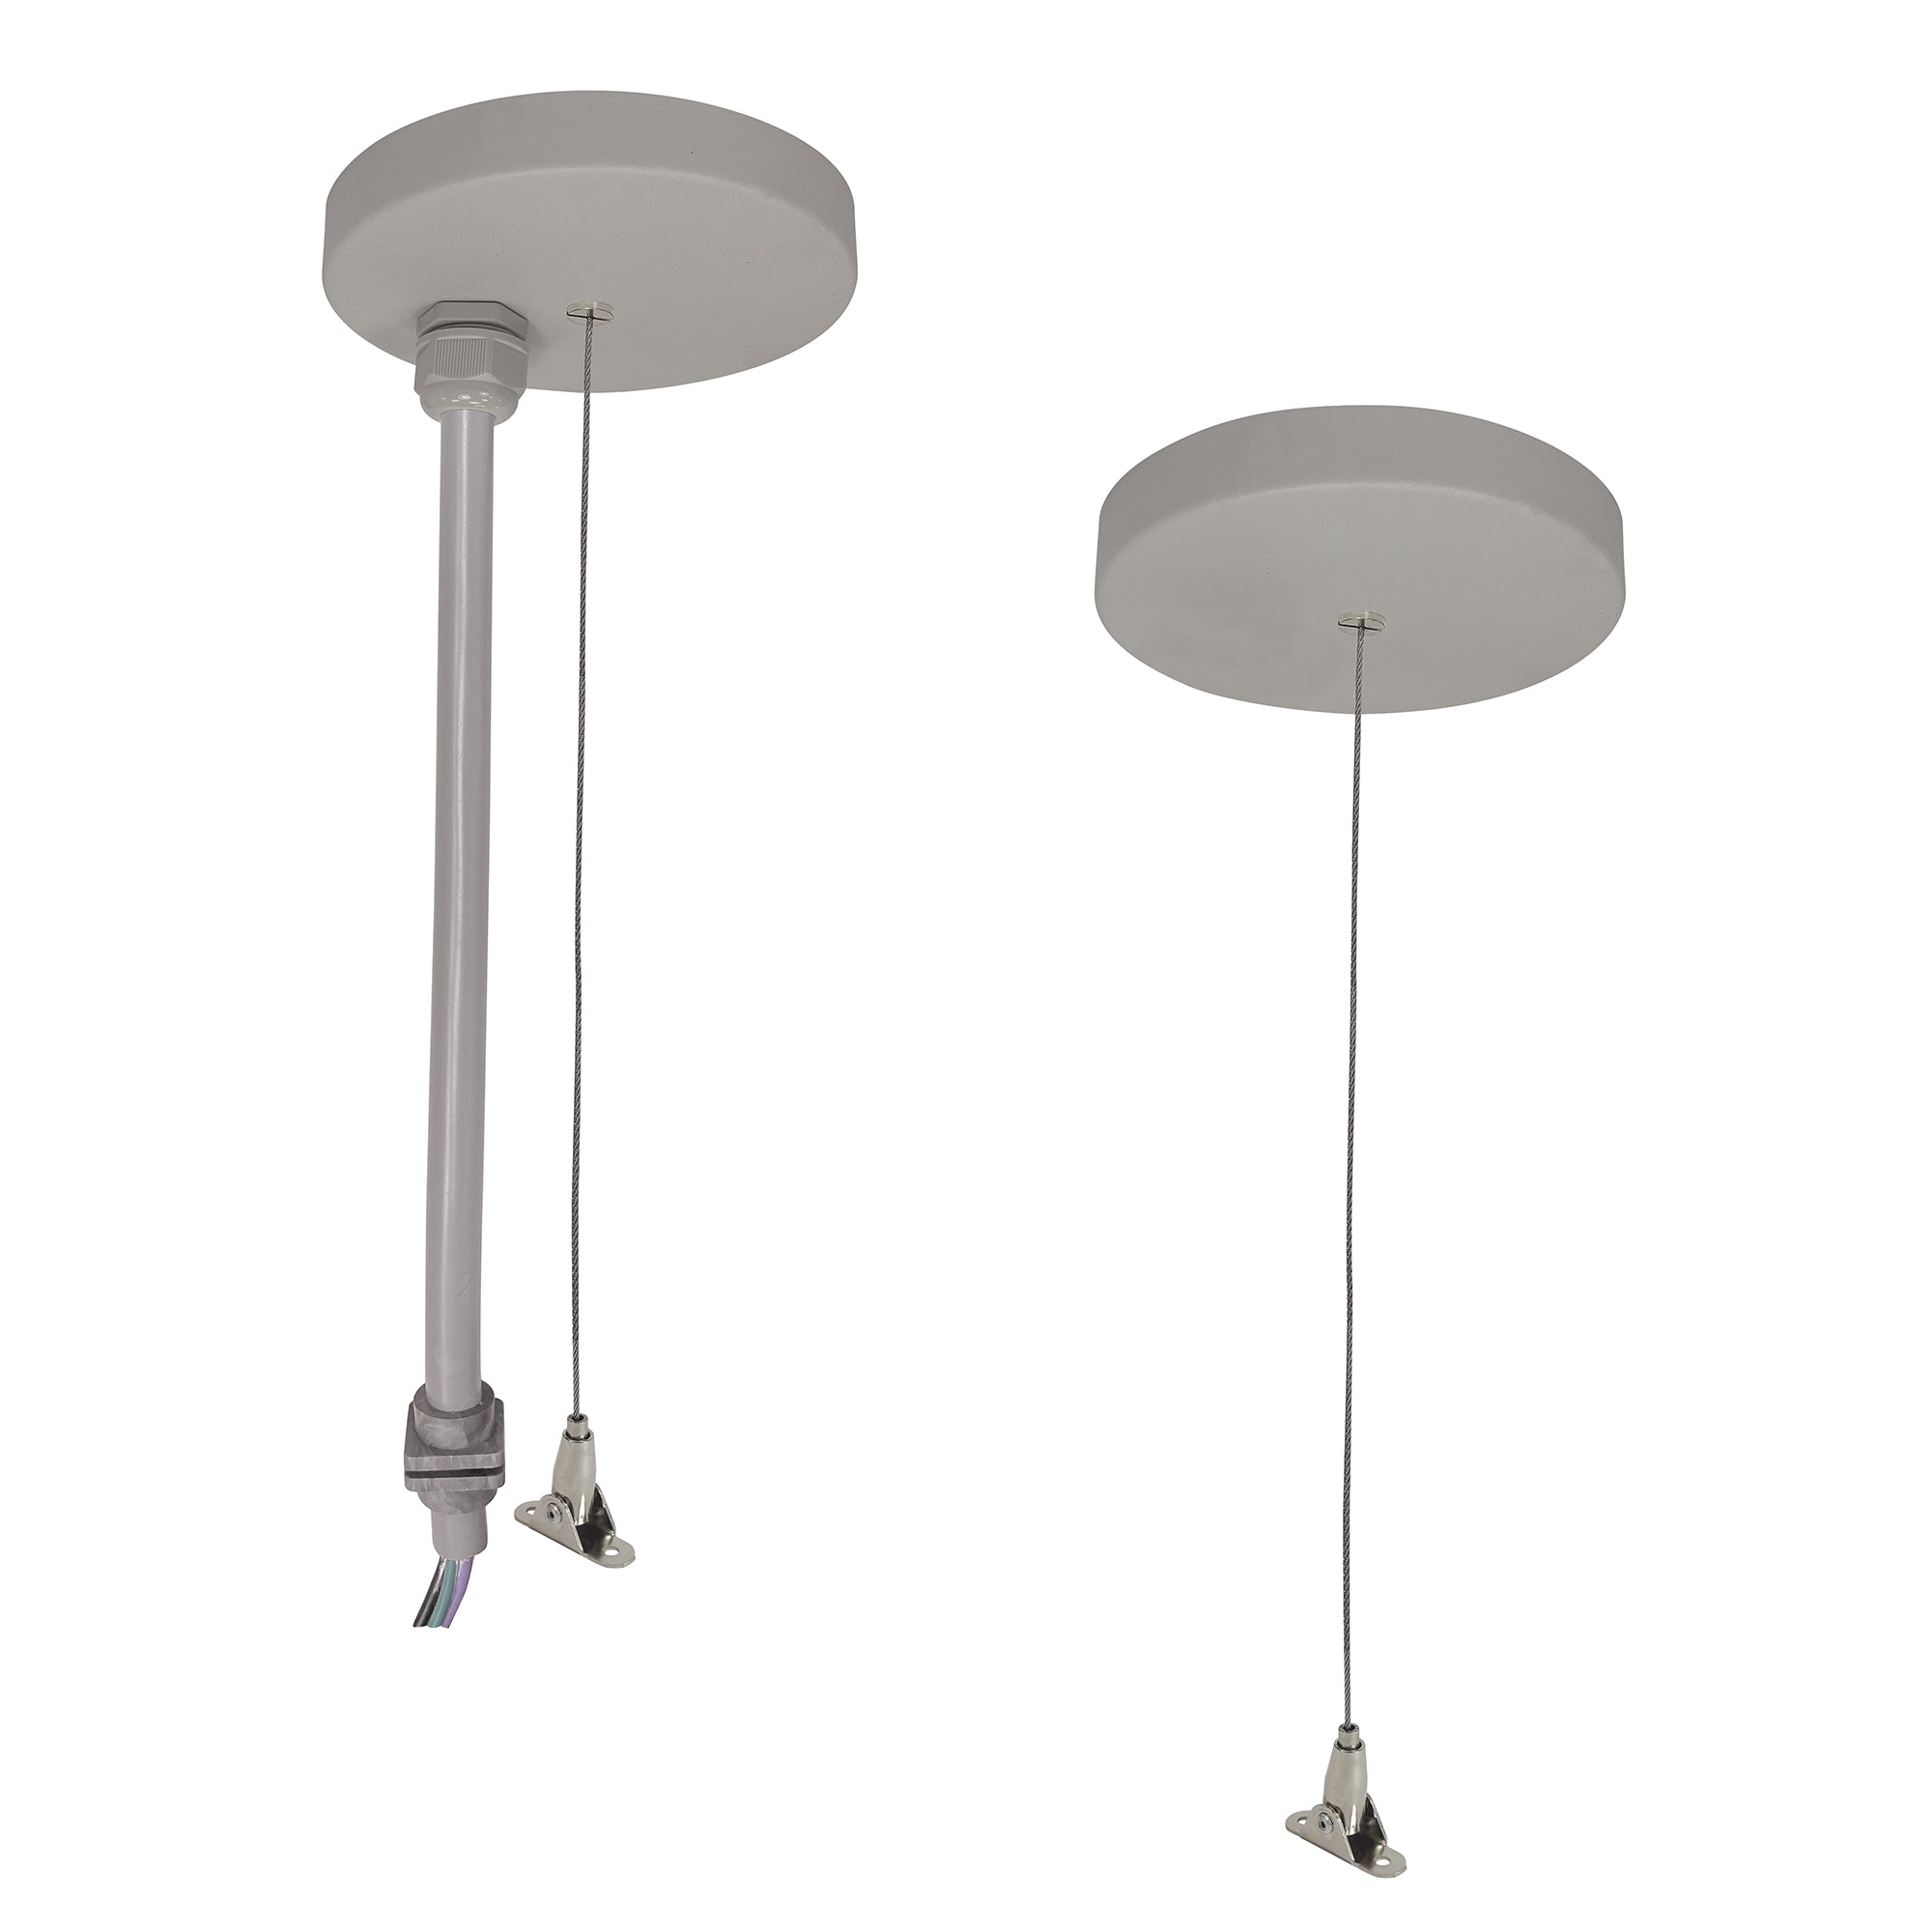 Nora Lighting NLUD-PCCA - Linear - 8' Pendant & Power Mounting Kit for NLUD Series, Aluminum Finish